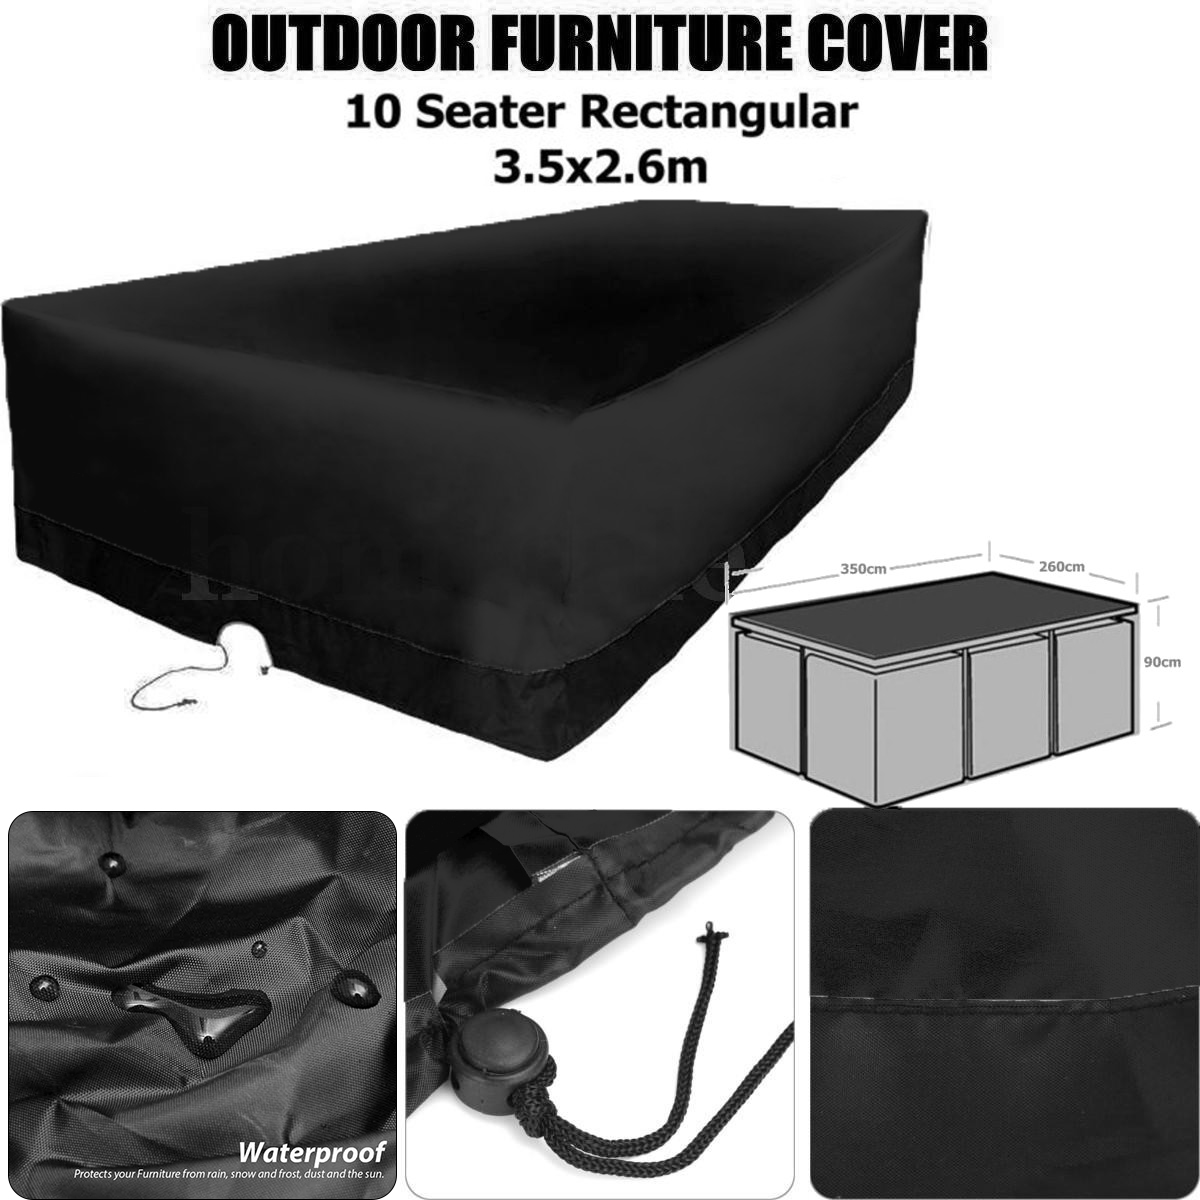 KING-DO-WAY-Outdoor-Patio-Furniture-Covers-Waterproof-Breathable-420D-Oxford-Fabric-with-4-Windproof-1540876-5